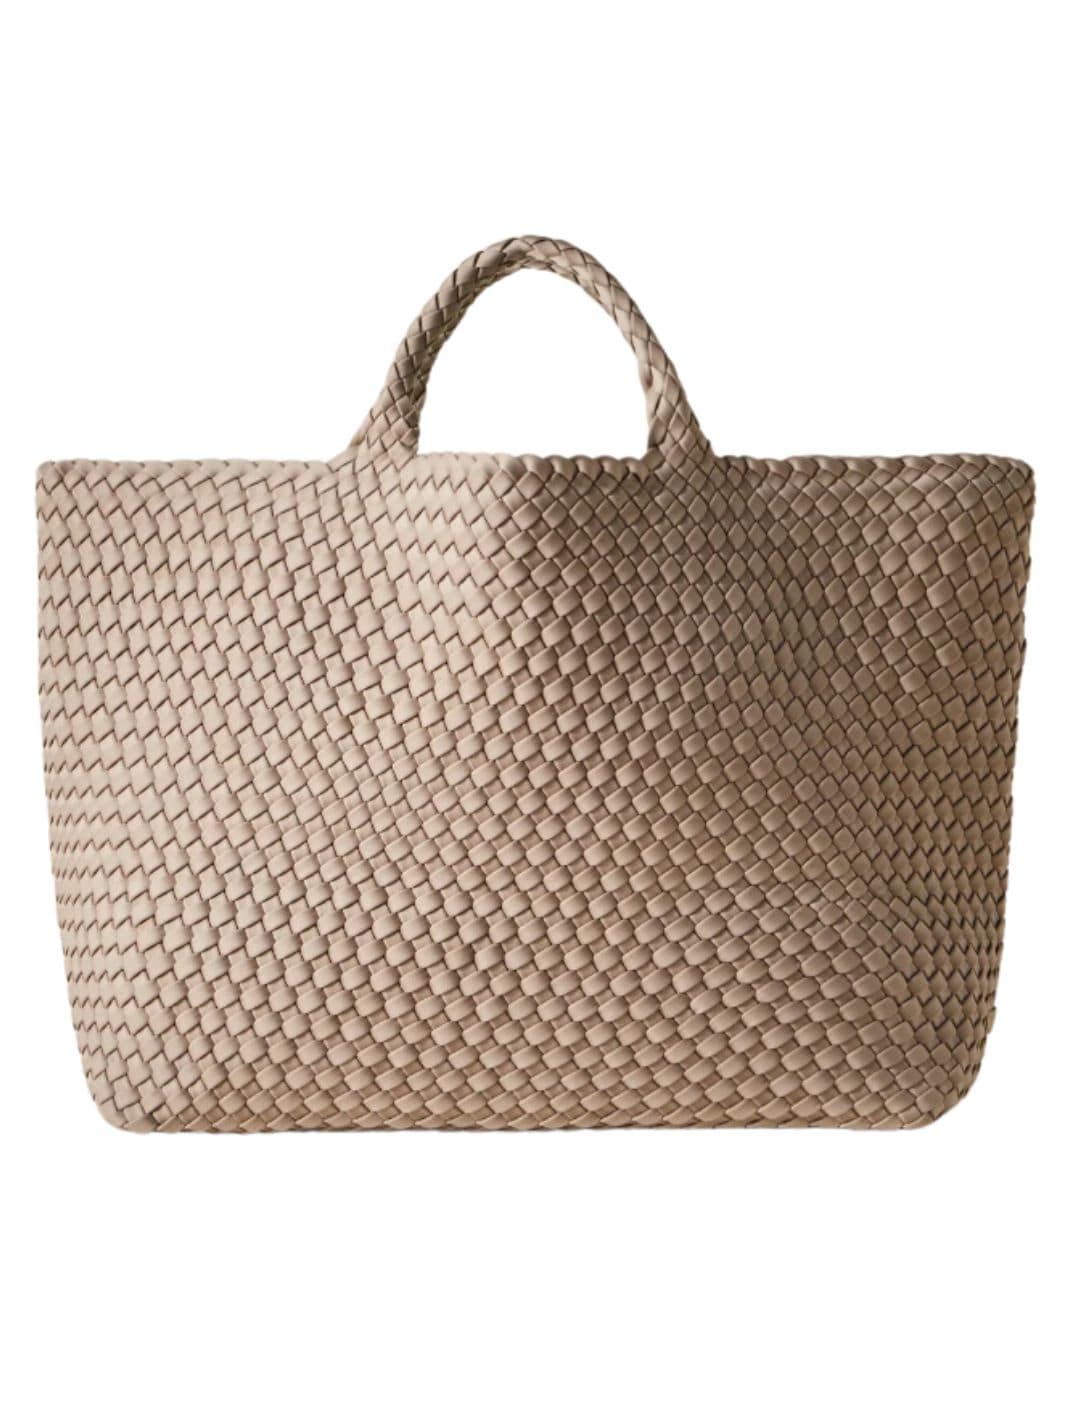 Naghedi Bags Tote Bag | St. Barths Large Tote Cashmere